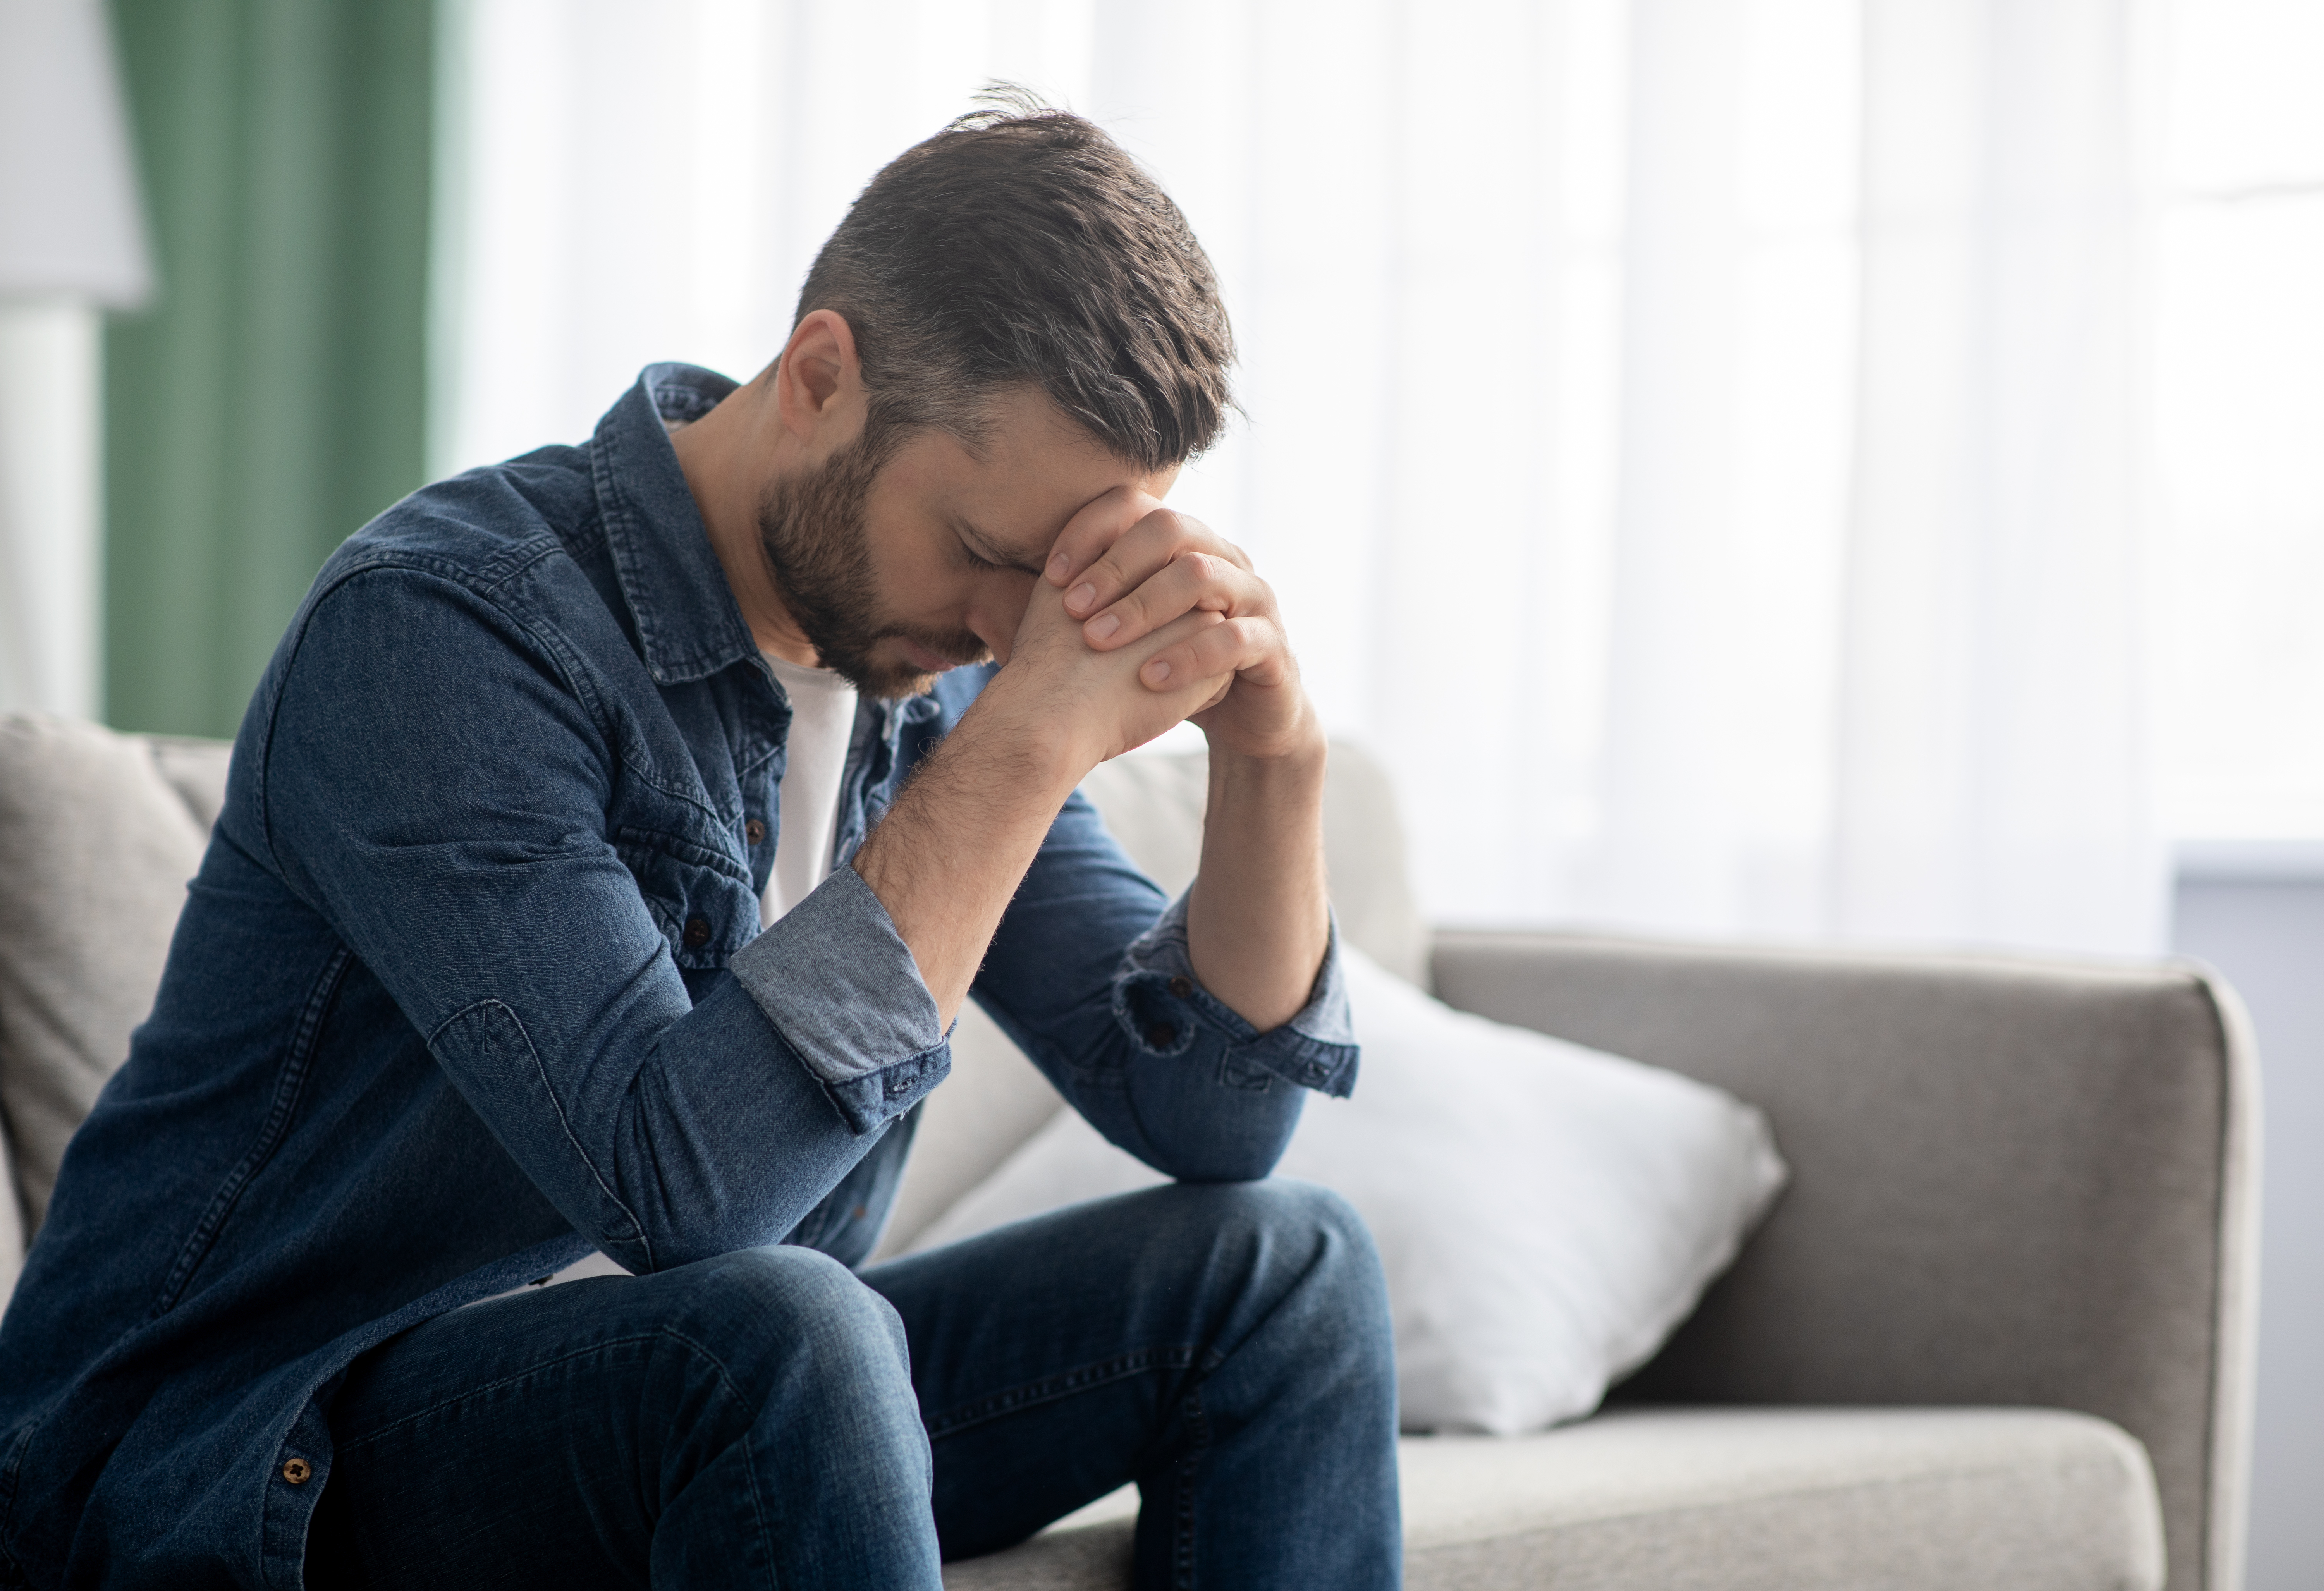 Depressed middle-aged man | Source: Shutterstock